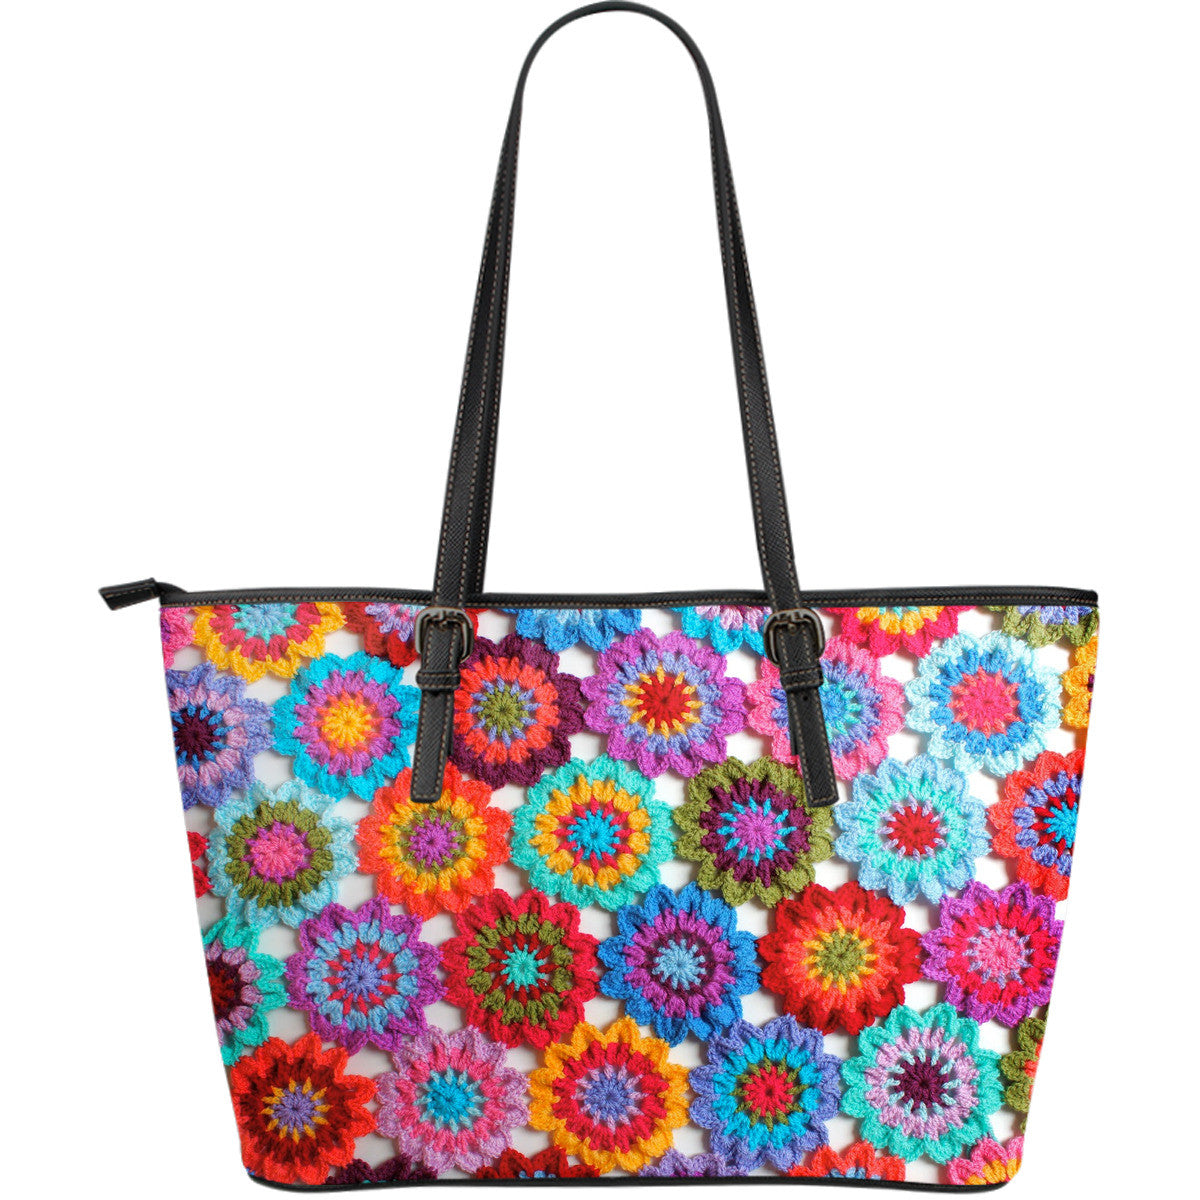 Crochet Patterned Large Leather Tote